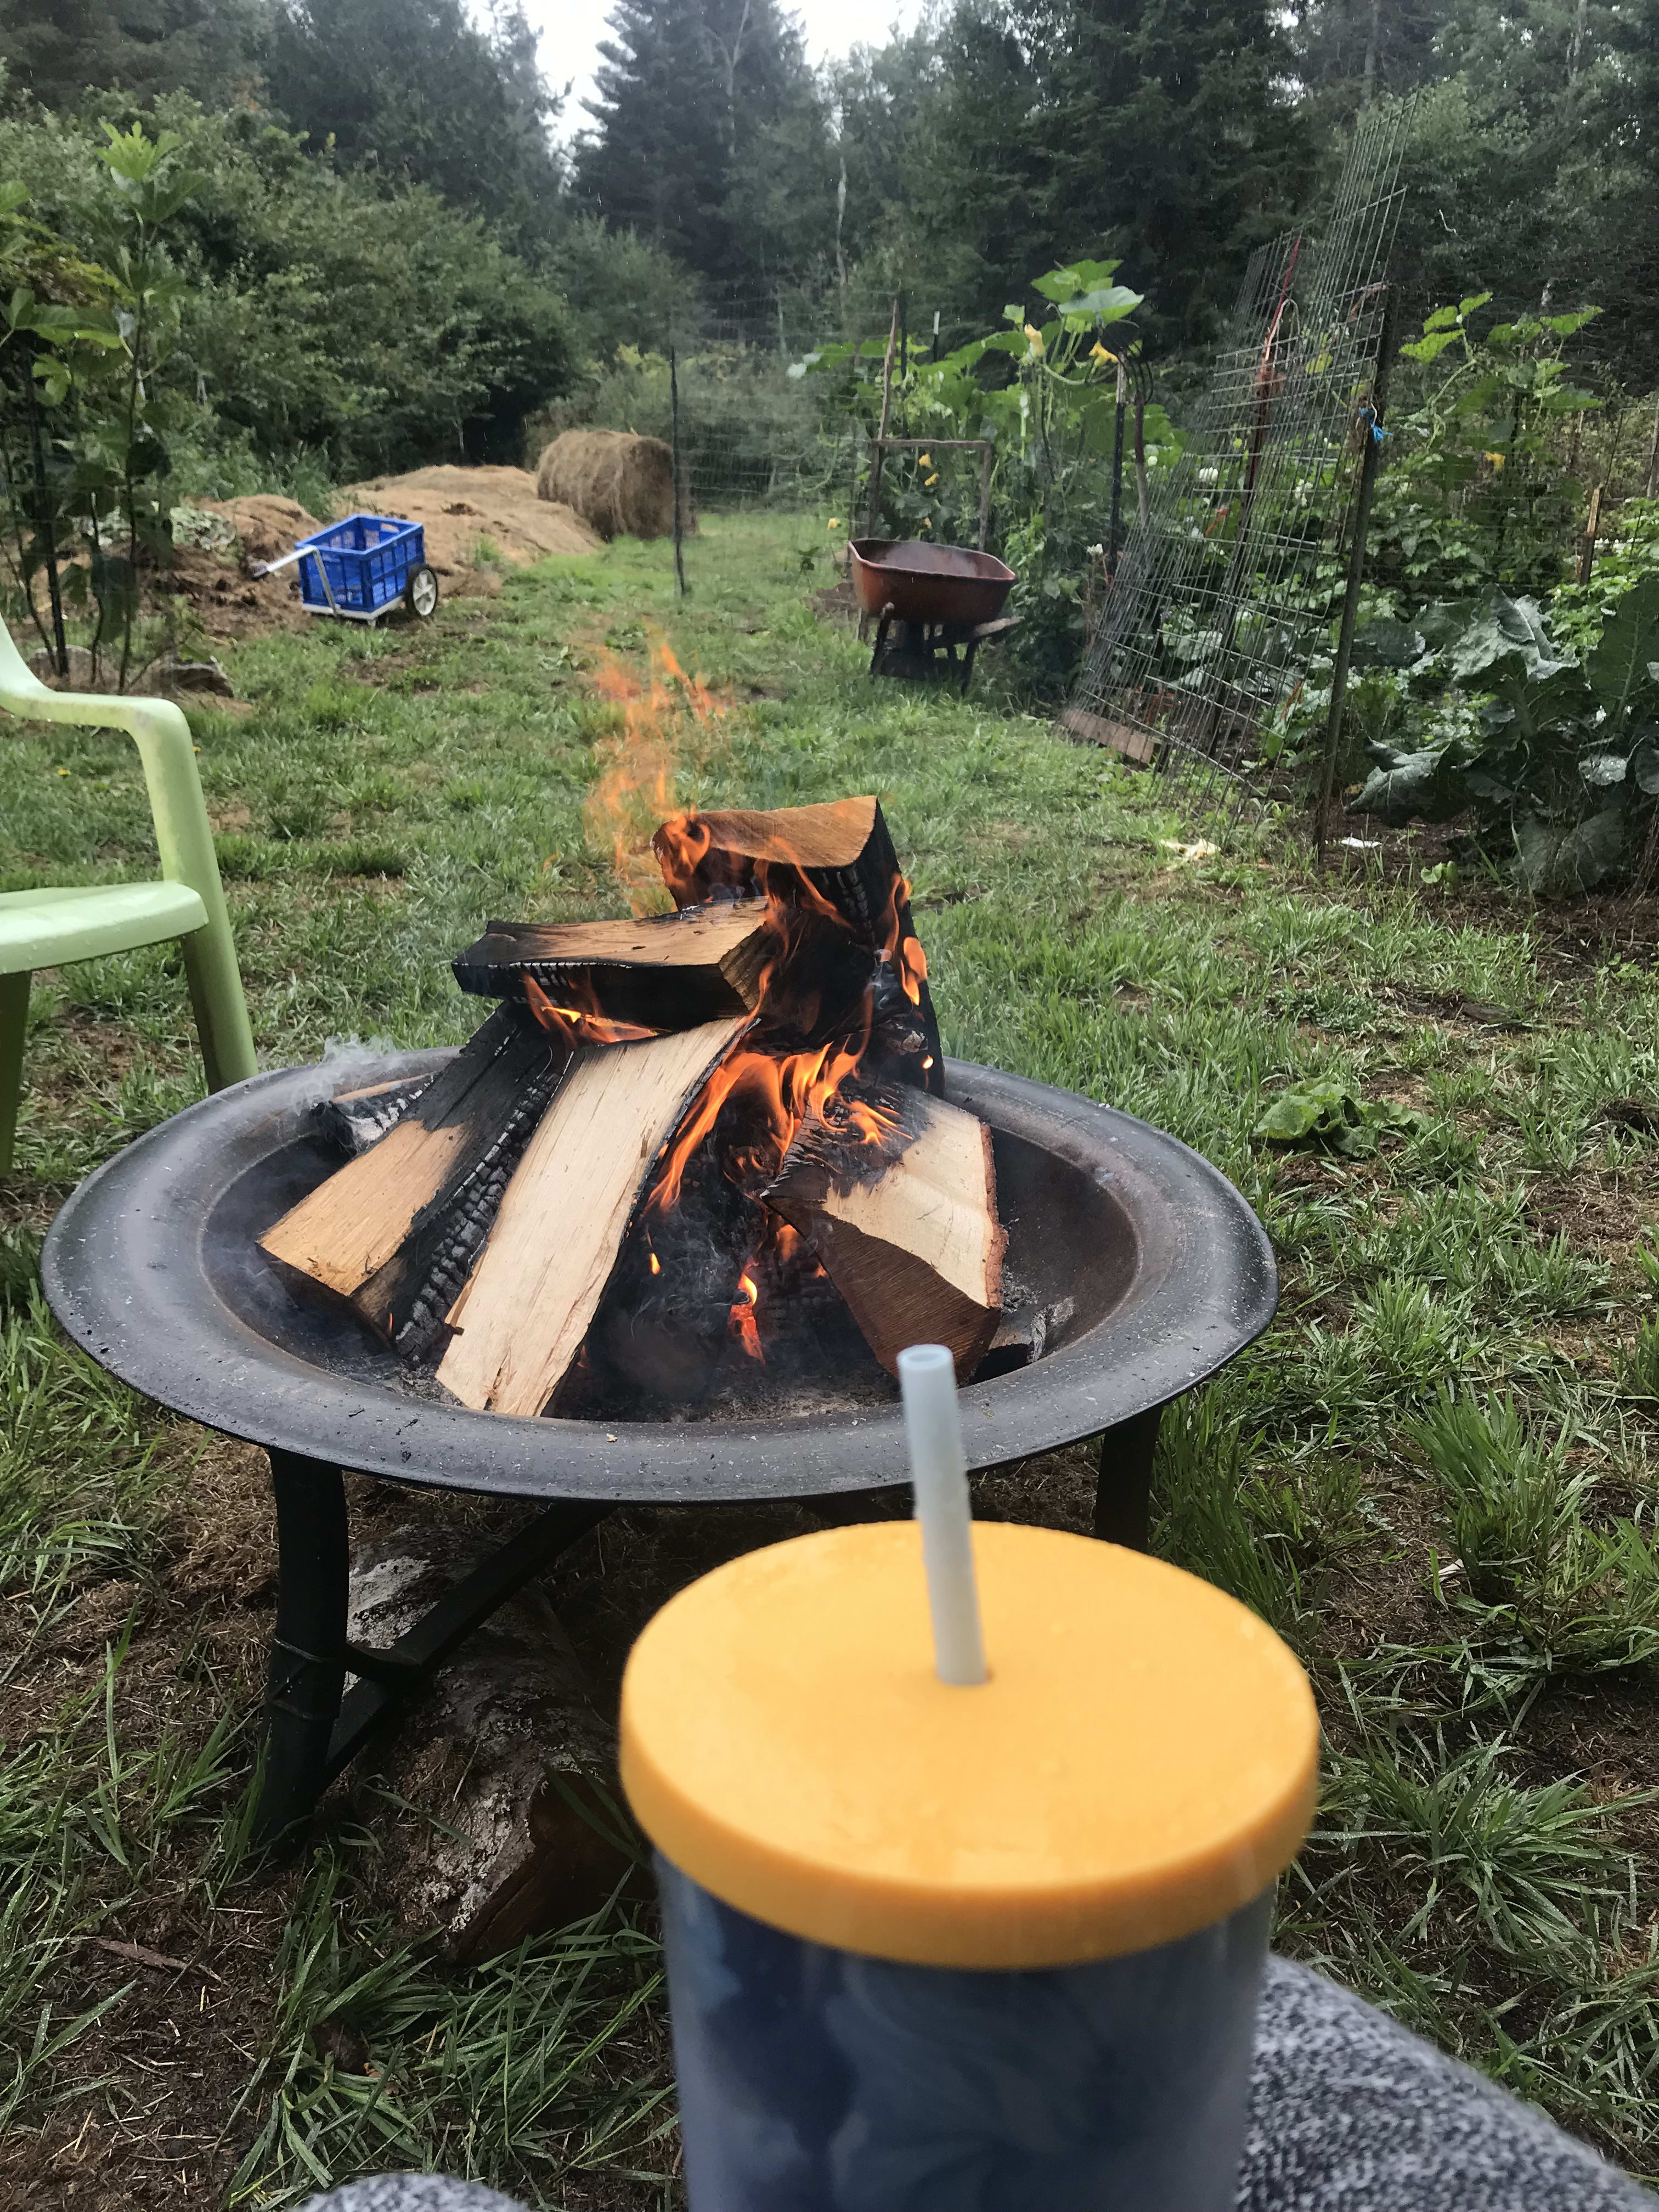 Cocktail hour and campfire 